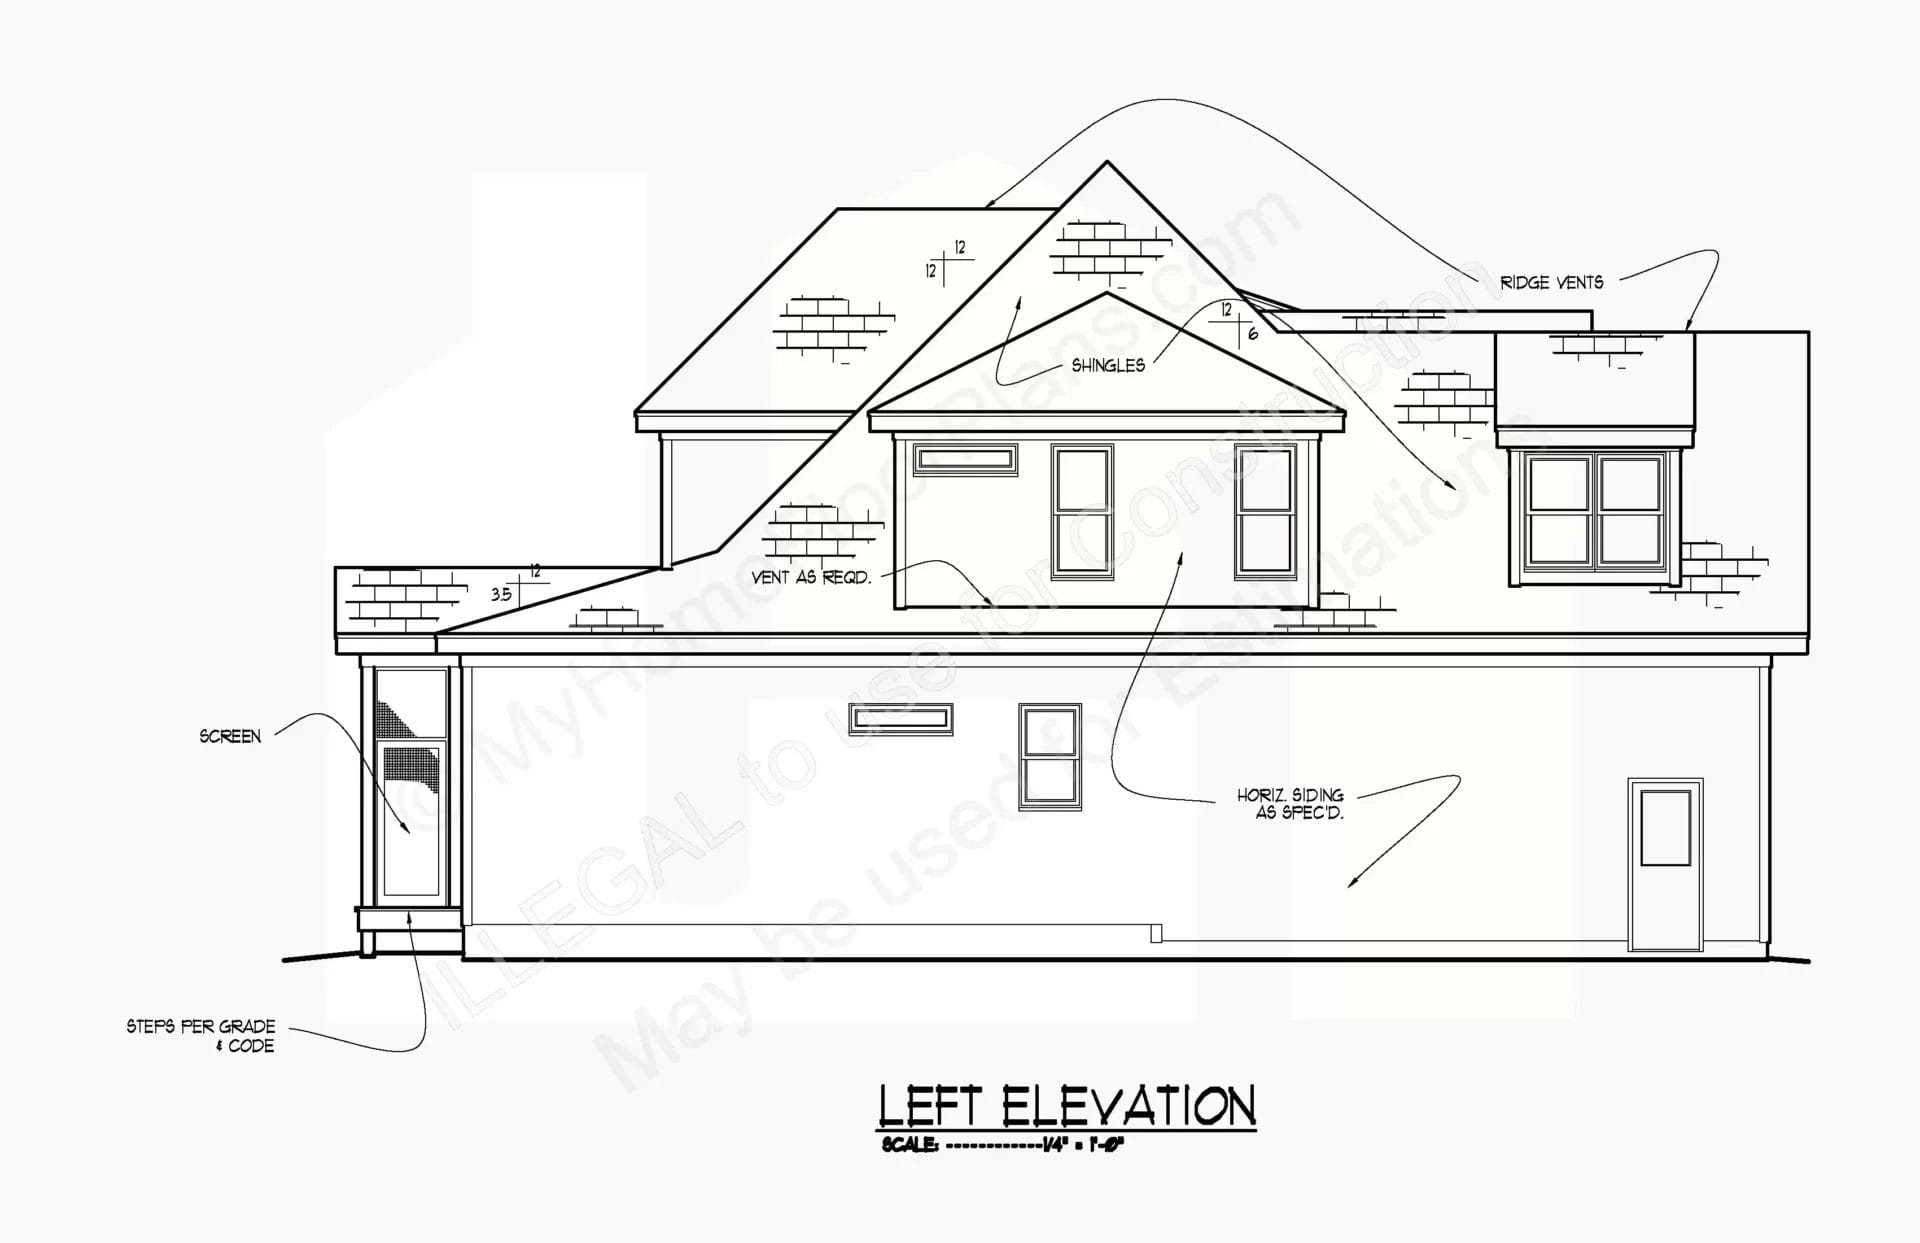 Technical drawing of the left elevation of a two-story house showing labeled architectural details such as roof pitch, siding, shingles, and height annotations. Notable features include a screened porch and multiple windows. (13-1919)